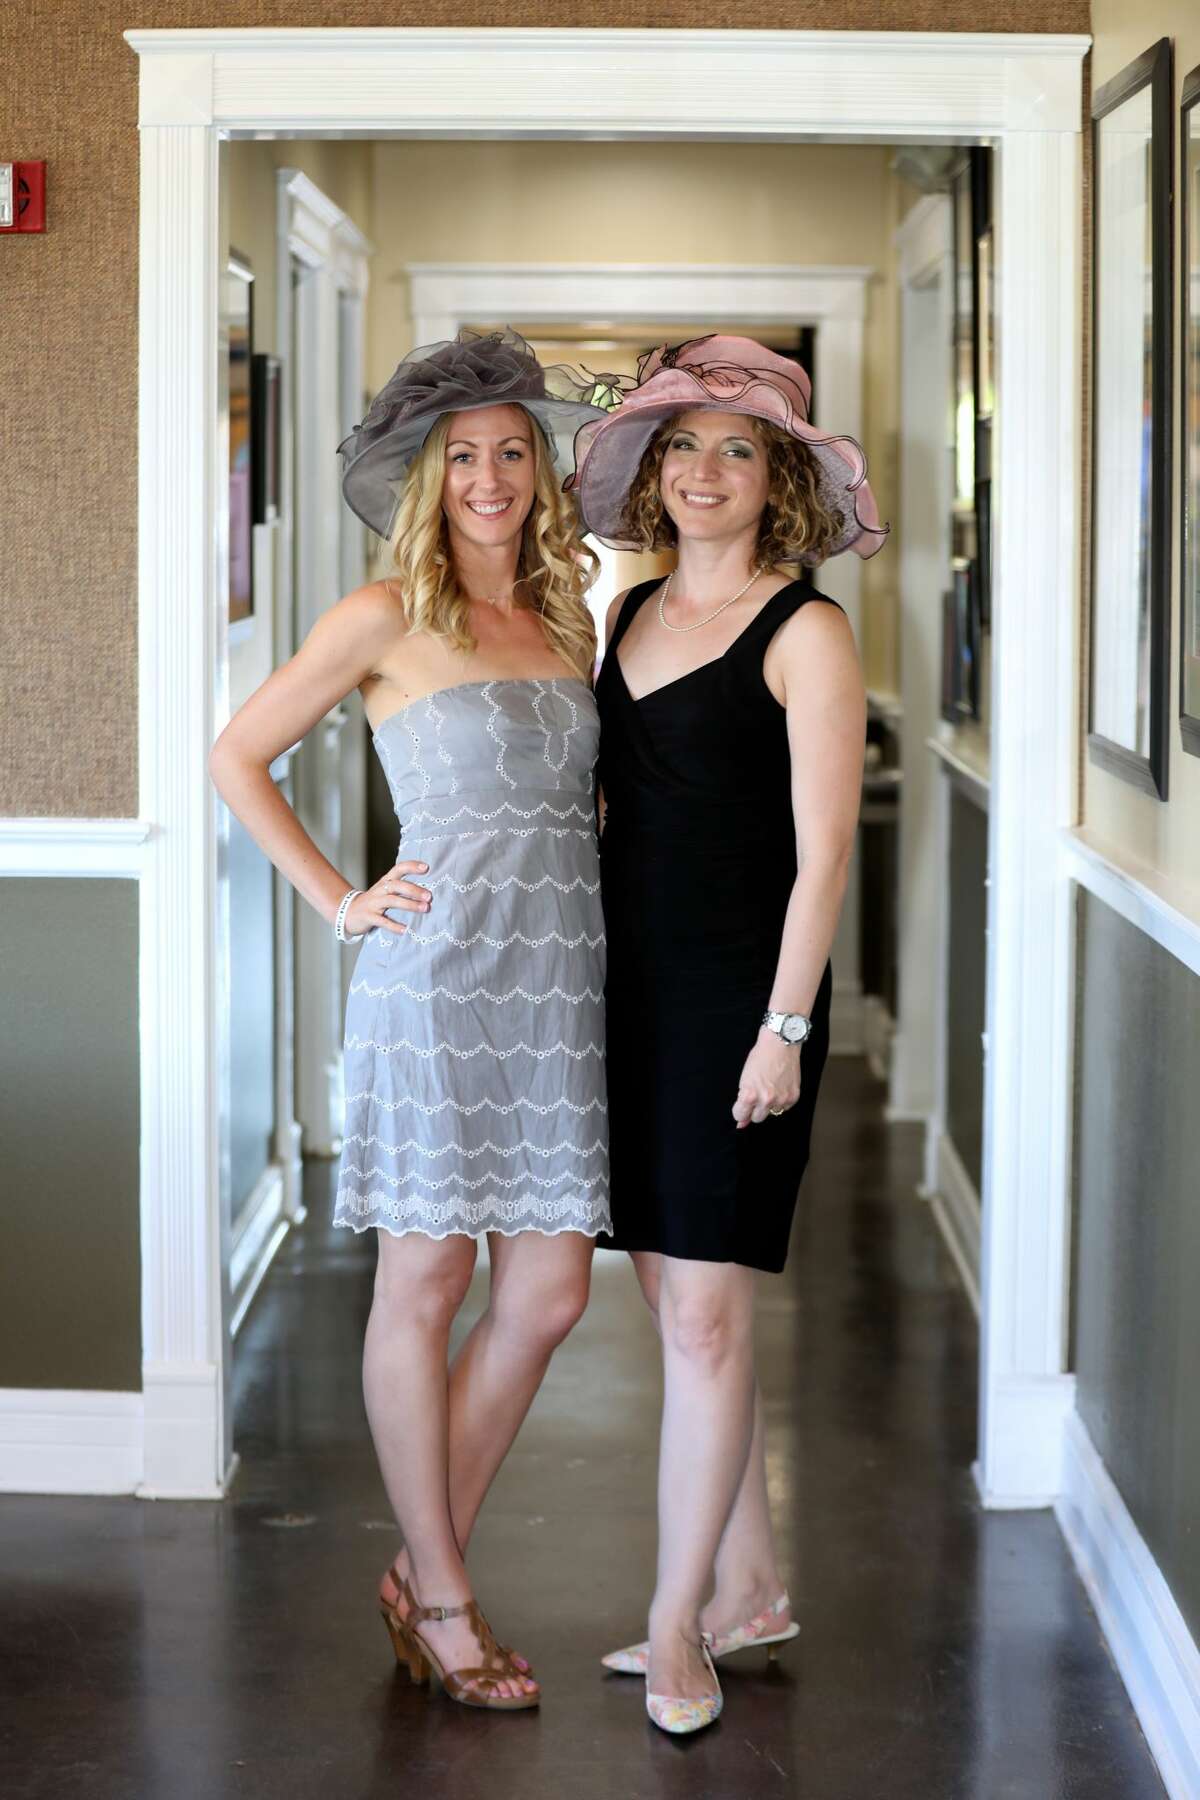 The San Antonio Public Library Foundation mixed the traditions of the Kentucky Derby with Cinco De Mayo during the special fundraiser Cinco De Derby Saturday, May 6, 2017.